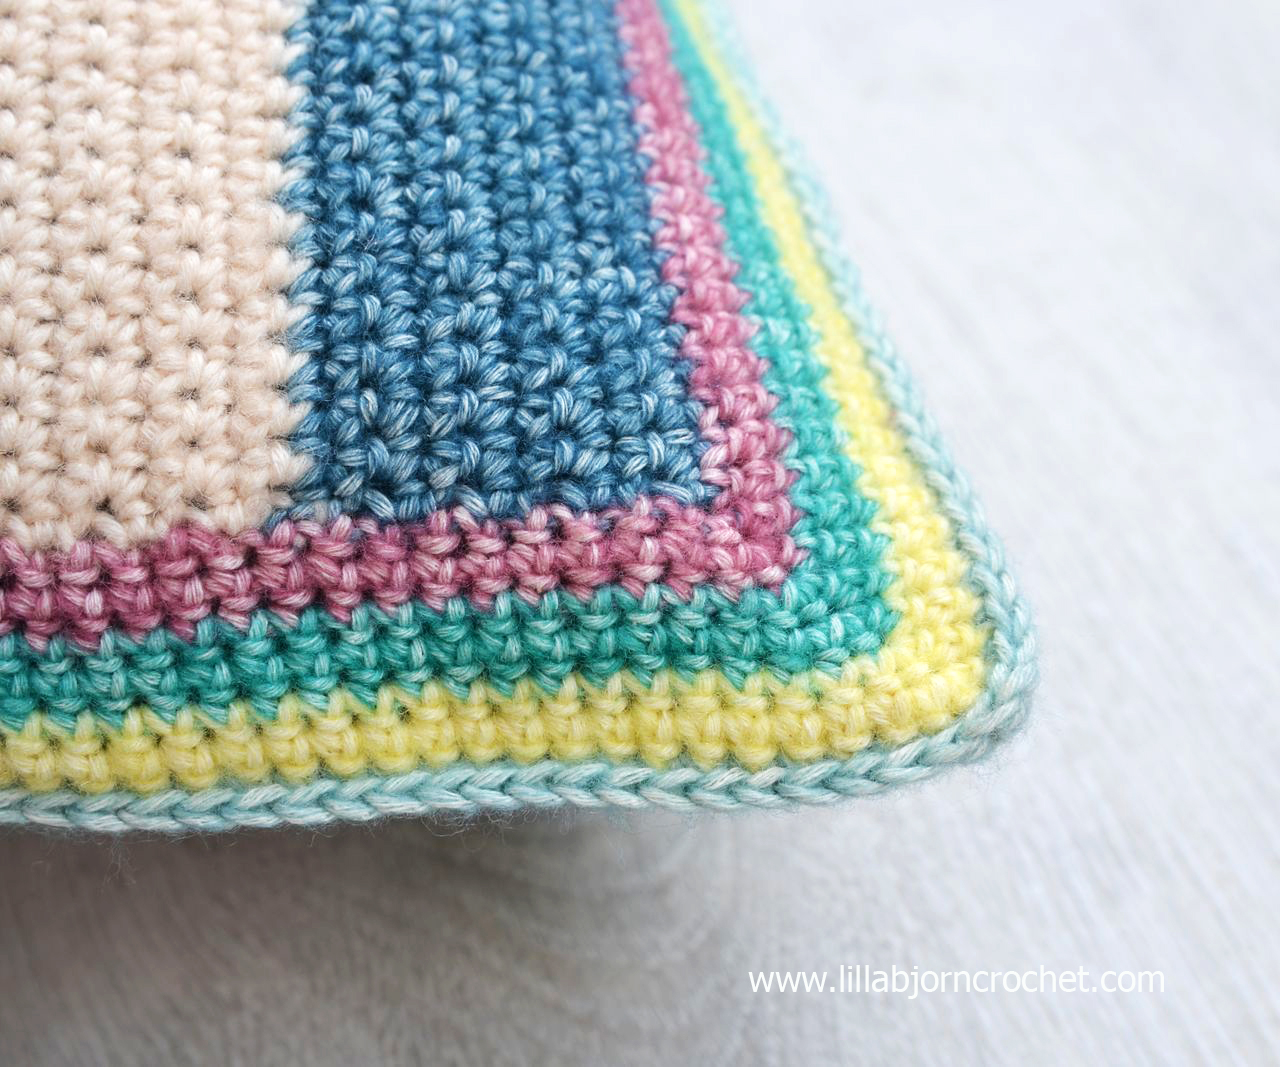 Crochet pillow cover with colorful circles made in tapestry crochet. Free pattern by Lilla Bjorn )with step-by-step pictures)